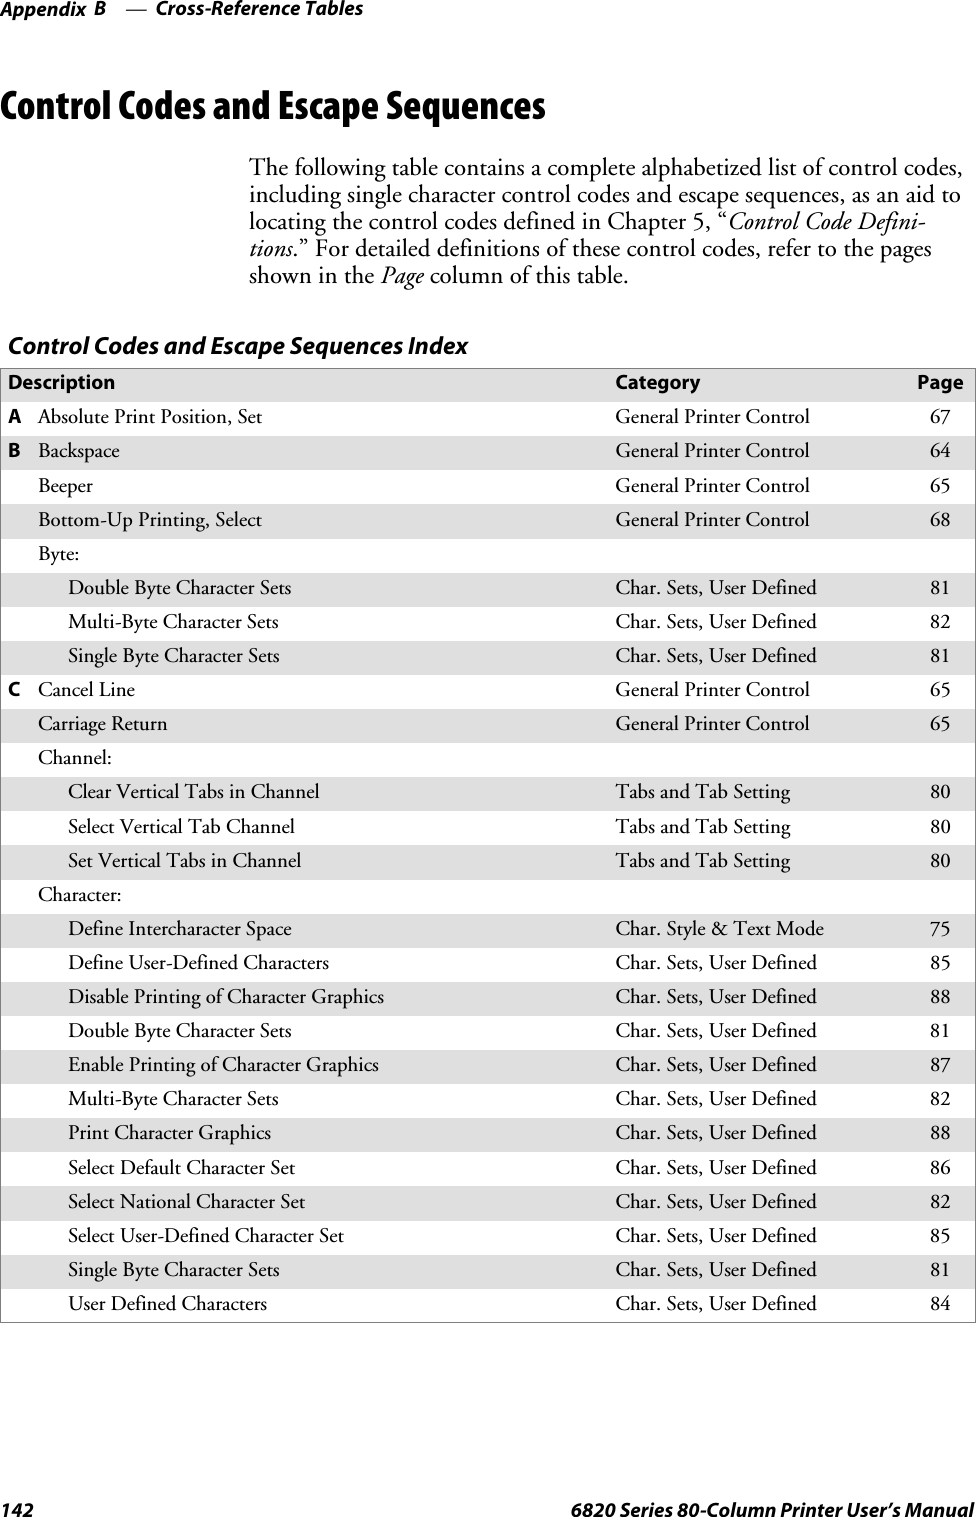 Cross-Reference TablesAppendix —B142 6820 Series 80-Column Printer User’s ManualControl Codes and Escape SequencesThe following table contains a complete alphabetized list of control codes,including single character control codes and escape sequences, as an aid tolocating the control codes defined in Chapter 5, “Control Code Defini-tions.” For detailed definitions of these control codes, refer to the pagesshowninthePage column of this table.Control Codes and Escape Sequences IndexDescription Category PageAAbsolute Print Position, Set General Printer Control 67BBackspace General Printer Control 64Beeper General Printer Control 65Bottom-Up Printing, Select General Printer Control 68Byte:Double Byte Character Sets Char. Sets, User Defined 81Multi-Byte Character Sets Char. Sets, User Defined 82Single Byte Character Sets Char. Sets, User Defined 81CCancel Line General Printer Control 65Carriage Return General Printer Control 65Channel:Clear Vertical Tabs in Channel Tabs and Tab Setting 80Select Vertical Tab Channel Tabs and Tab Setting 80Set Vertical Tabs in Channel Tabs and Tab Setting 80Character:Define Intercharacter Space Char. Style &amp; Text Mode 75Define User-Defined Characters Char. Sets, User Defined 85Disable Printing of Character Graphics Char. Sets, User Defined 88Double Byte Character Sets Char. Sets, User Defined 81Enable Printing of Character Graphics Char. Sets, User Defined 87Multi-Byte Character Sets Char. Sets, User Defined 82Print Character Graphics Char. Sets, User Defined 88Select Default Character Set Char. Sets, User Defined 86Select National Character Set Char. Sets, User Defined 82Select User-Defined Character Set Char. Sets, User Defined 85Single Byte Character Sets Char. Sets, User Defined 81User Defined Characters Char. Sets, User Defined 84